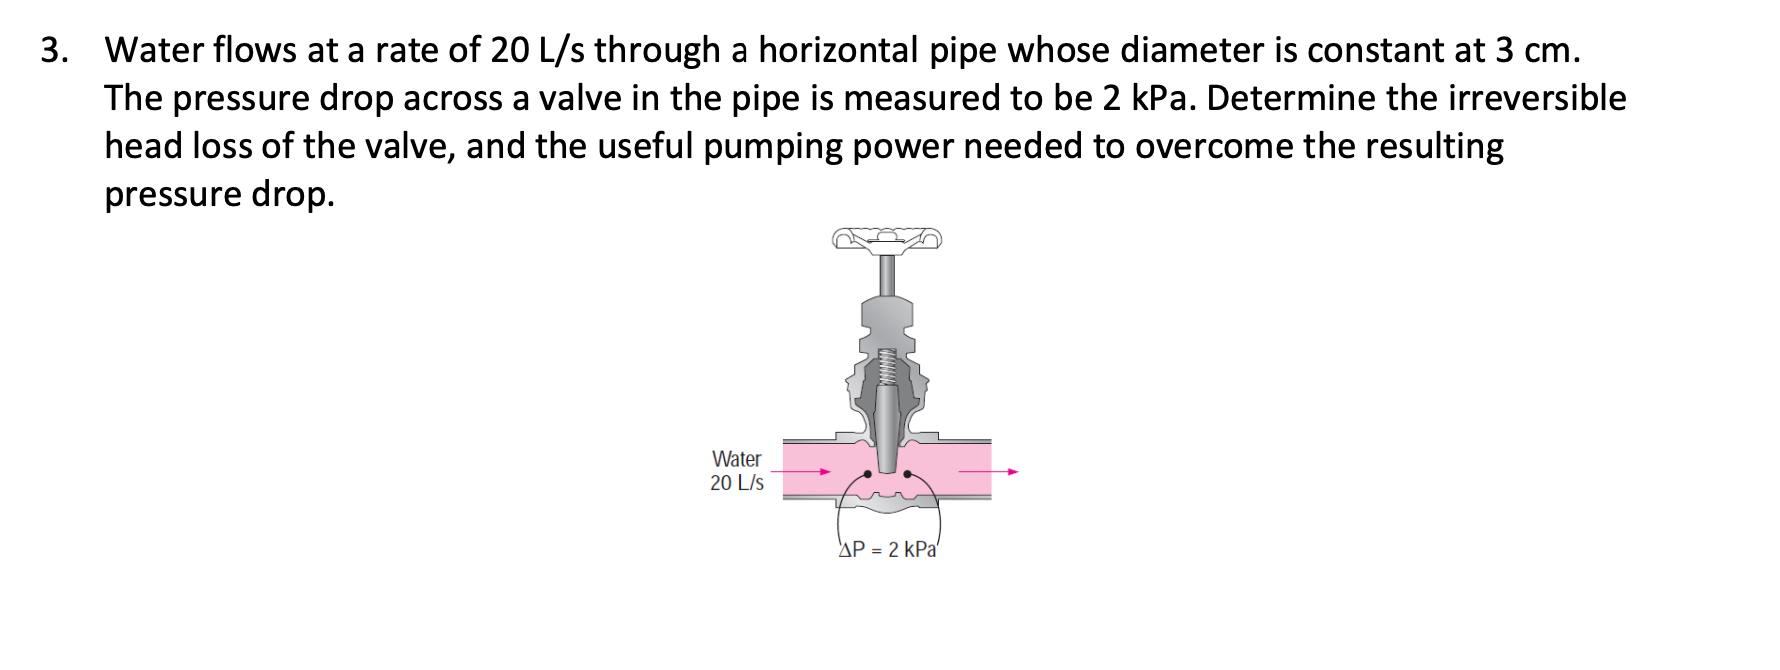 3. Water flows at a rate of 20 L/s through a horizontal pipe whose diameter is constant at 3 cm.
The pressure drop across a v